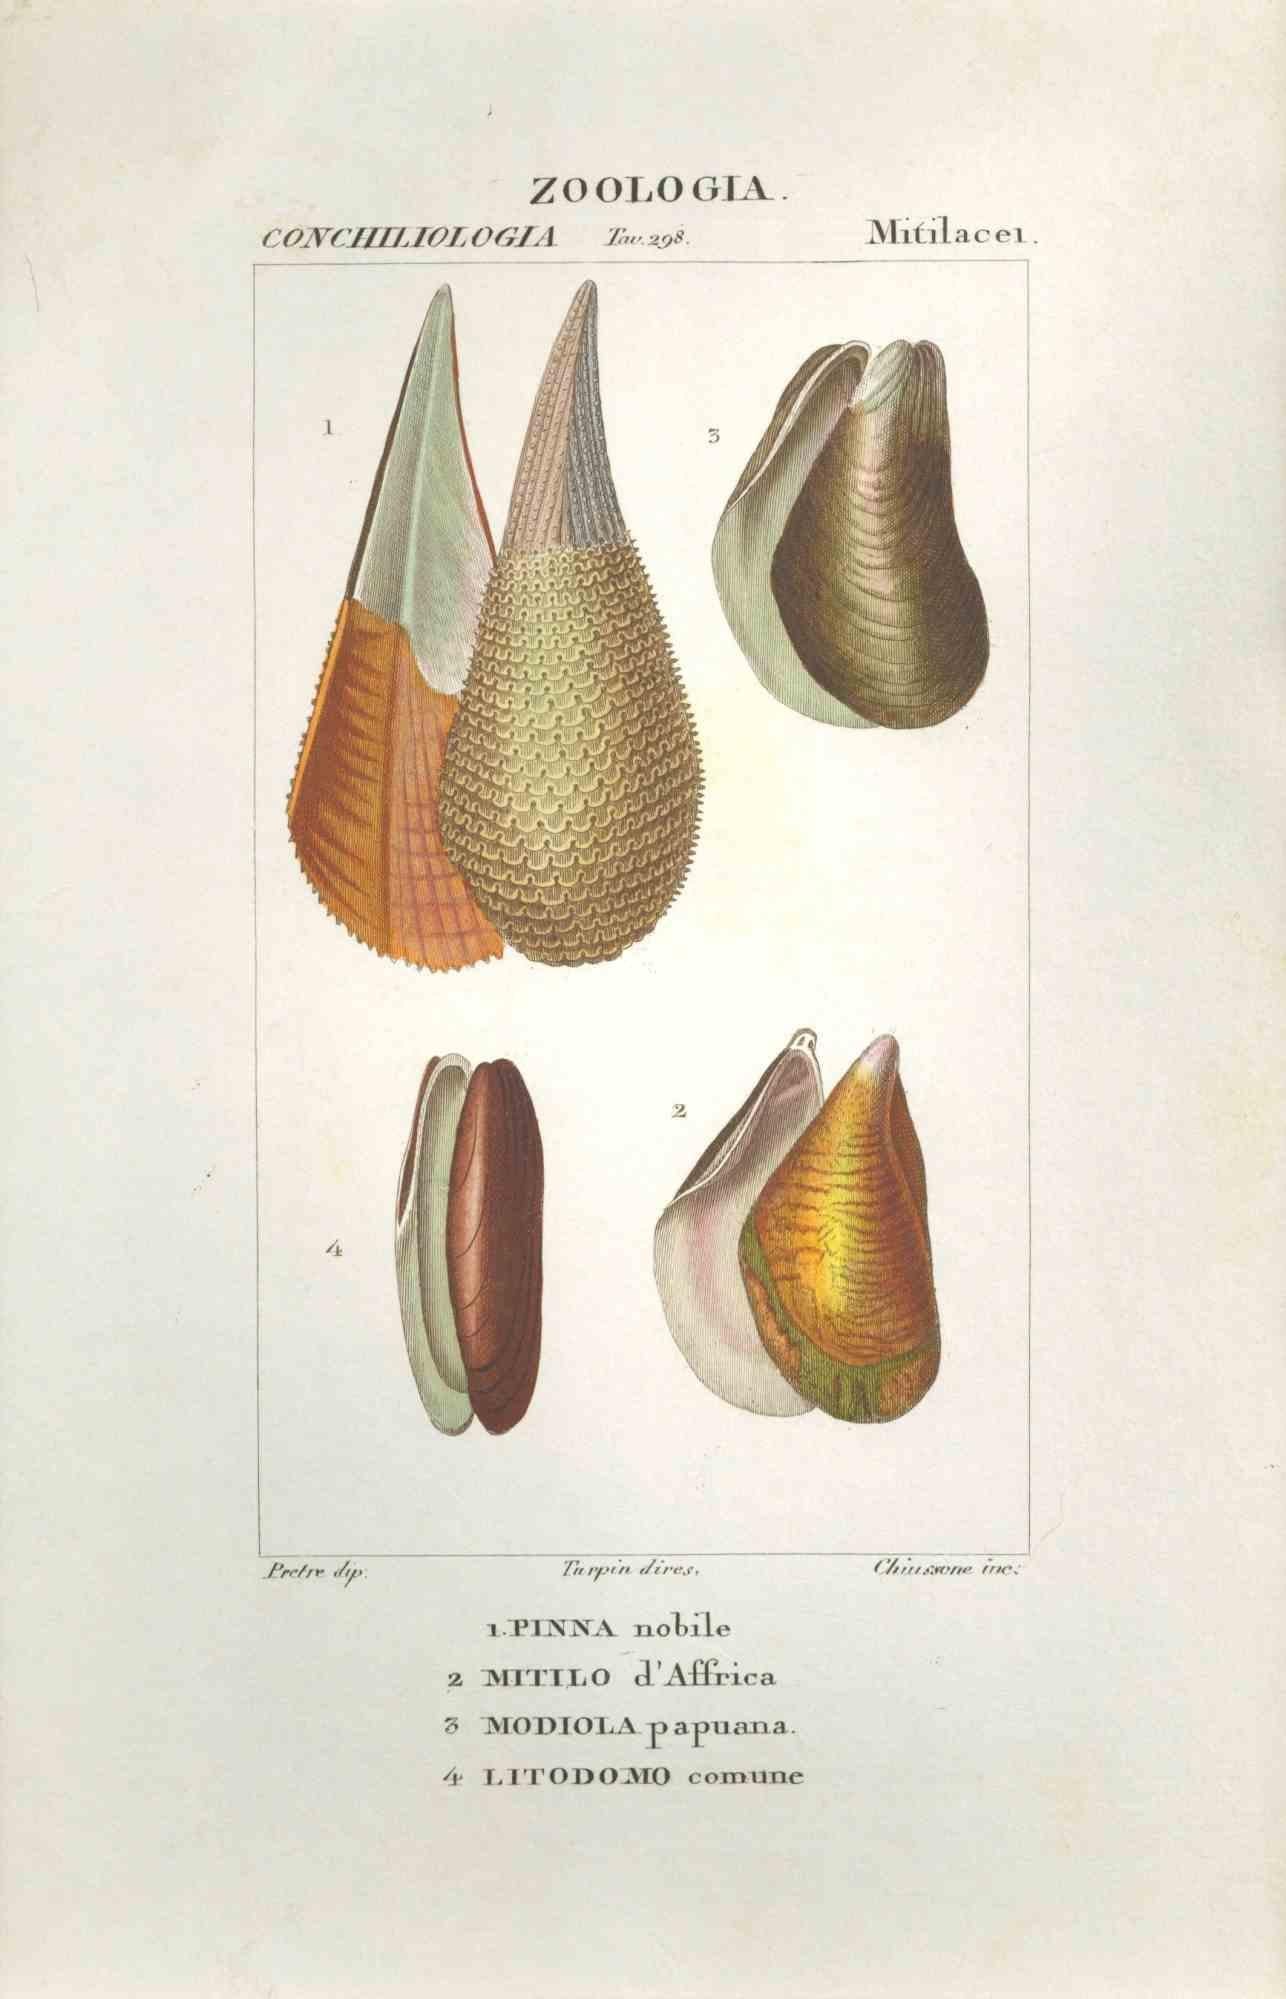 TURPIN, P[ierre Jean Francois] Animal Print - Mitilacei-Mytila-Zoology-Plate 298- Etching by Jean Francois Turpin-1831